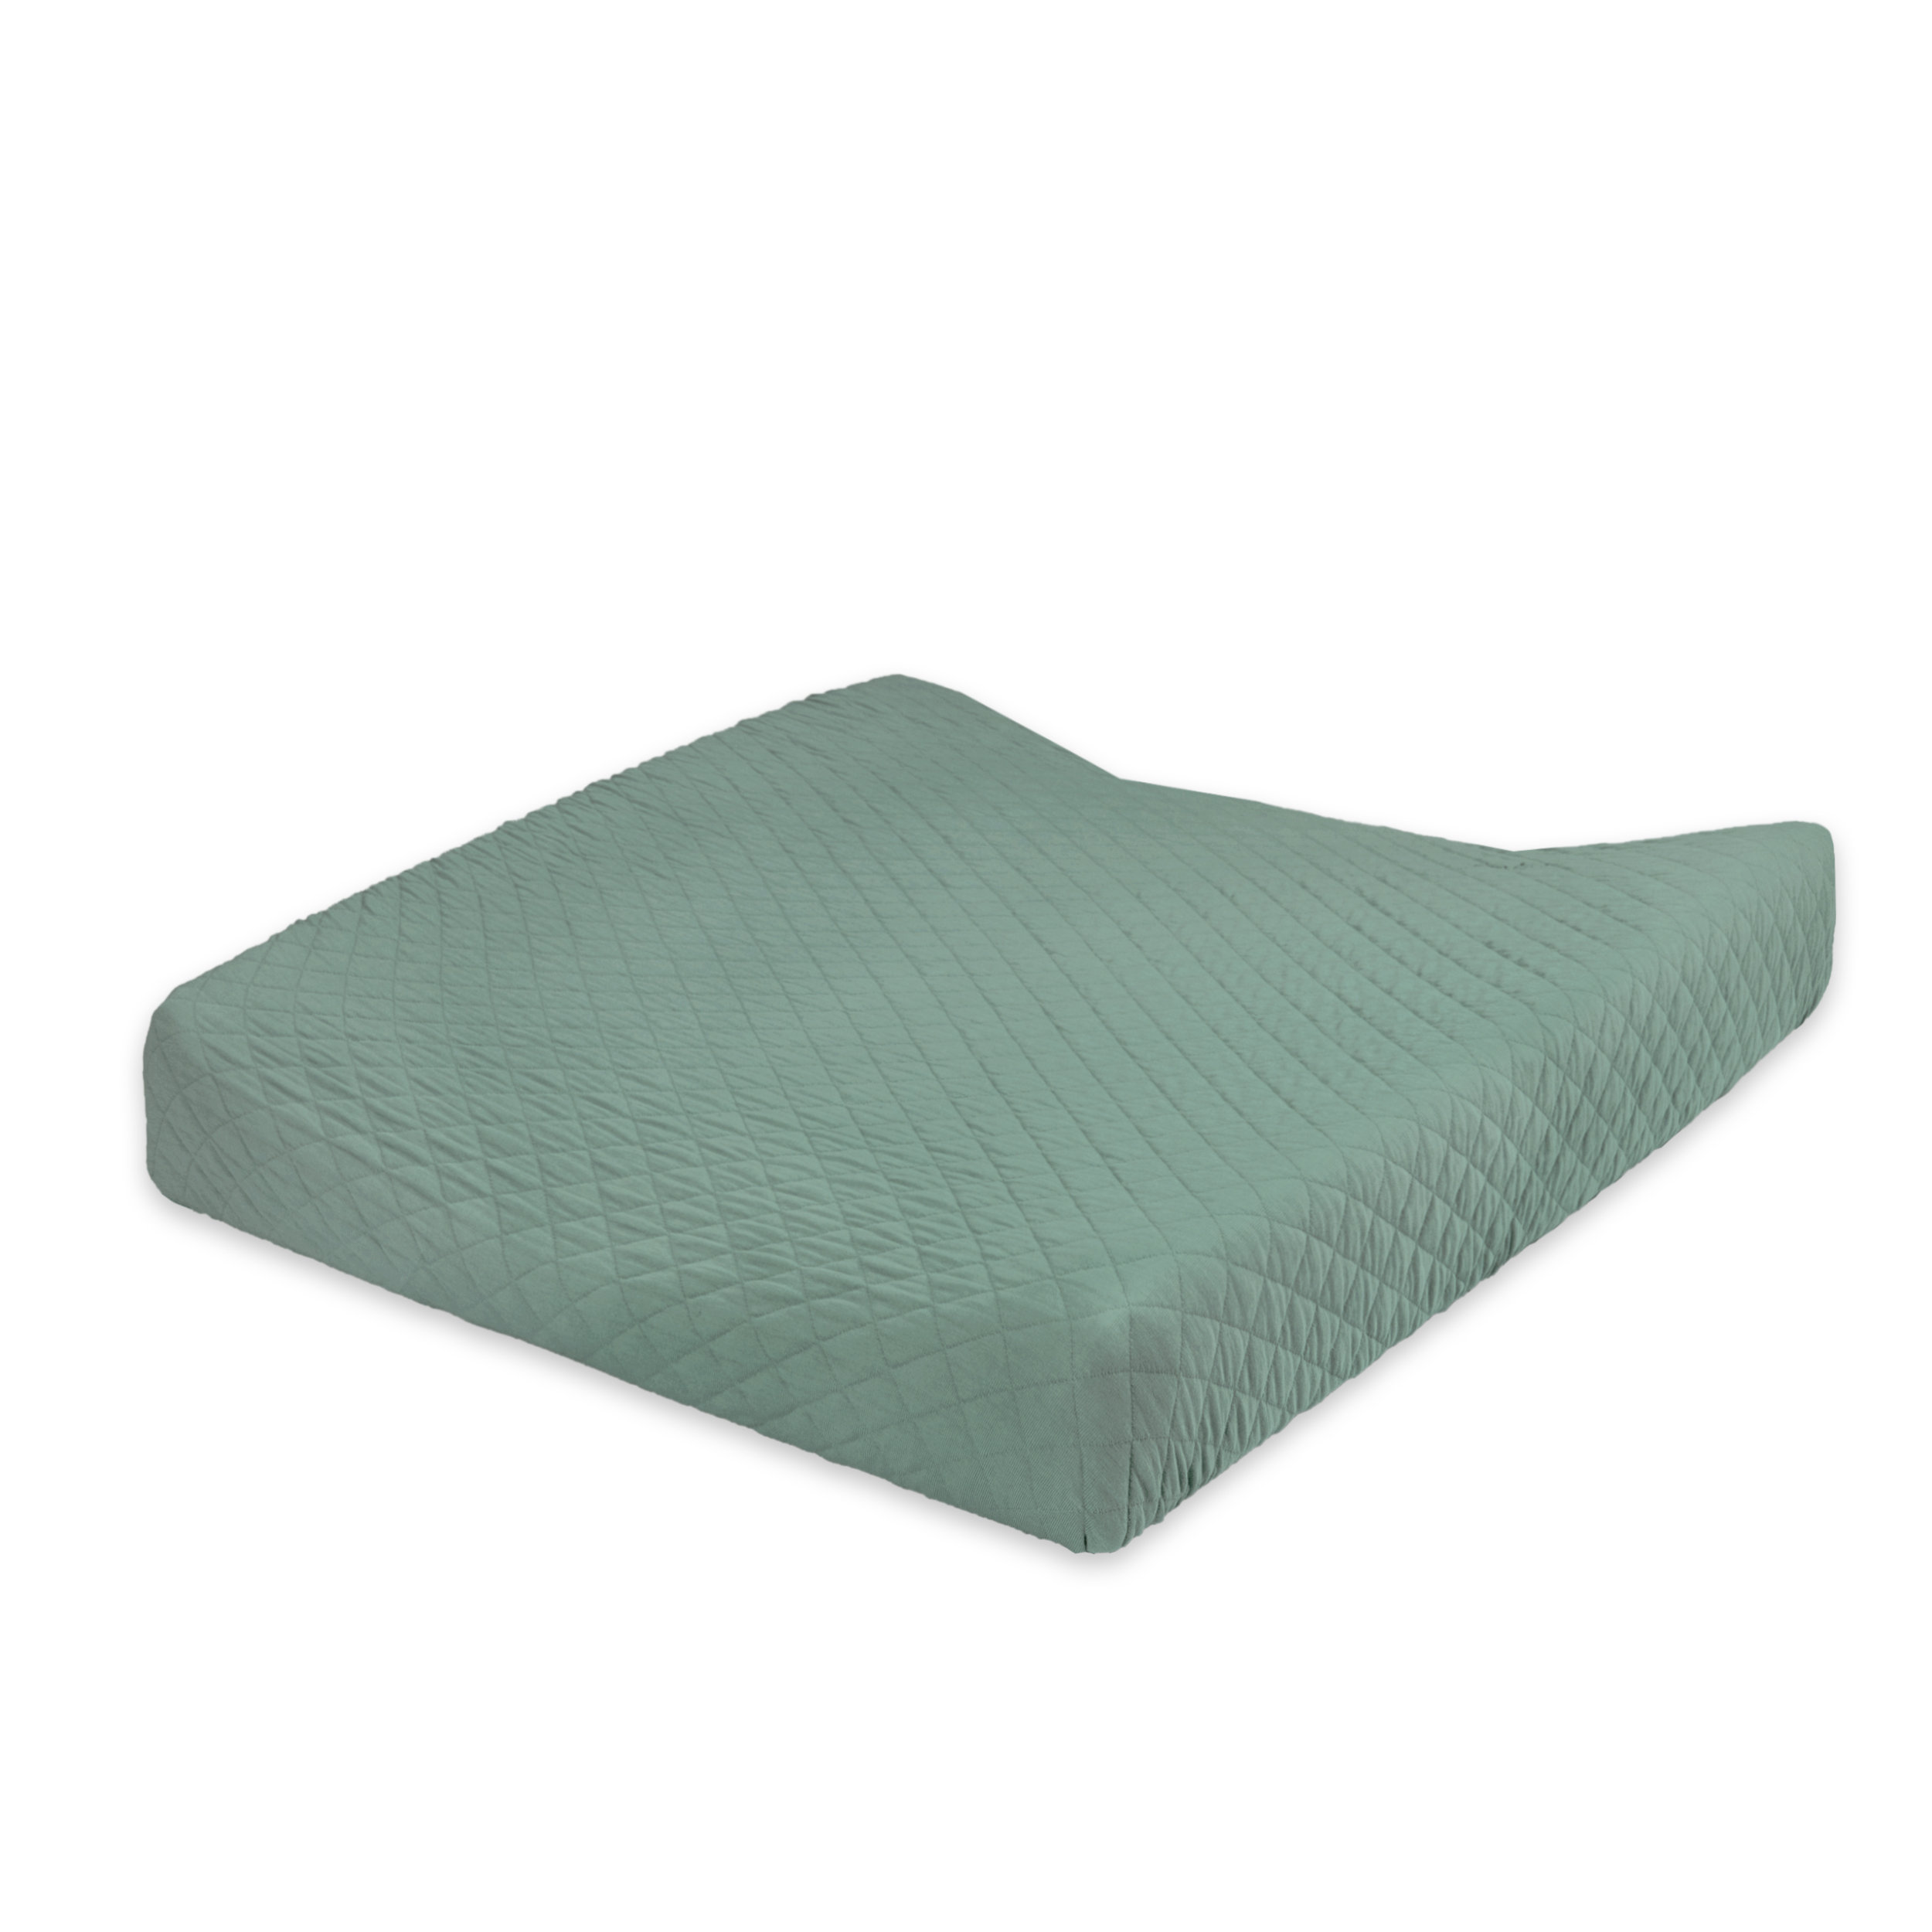 Changing mat cover Pady quilted jersey 50x75cm QUILT Green